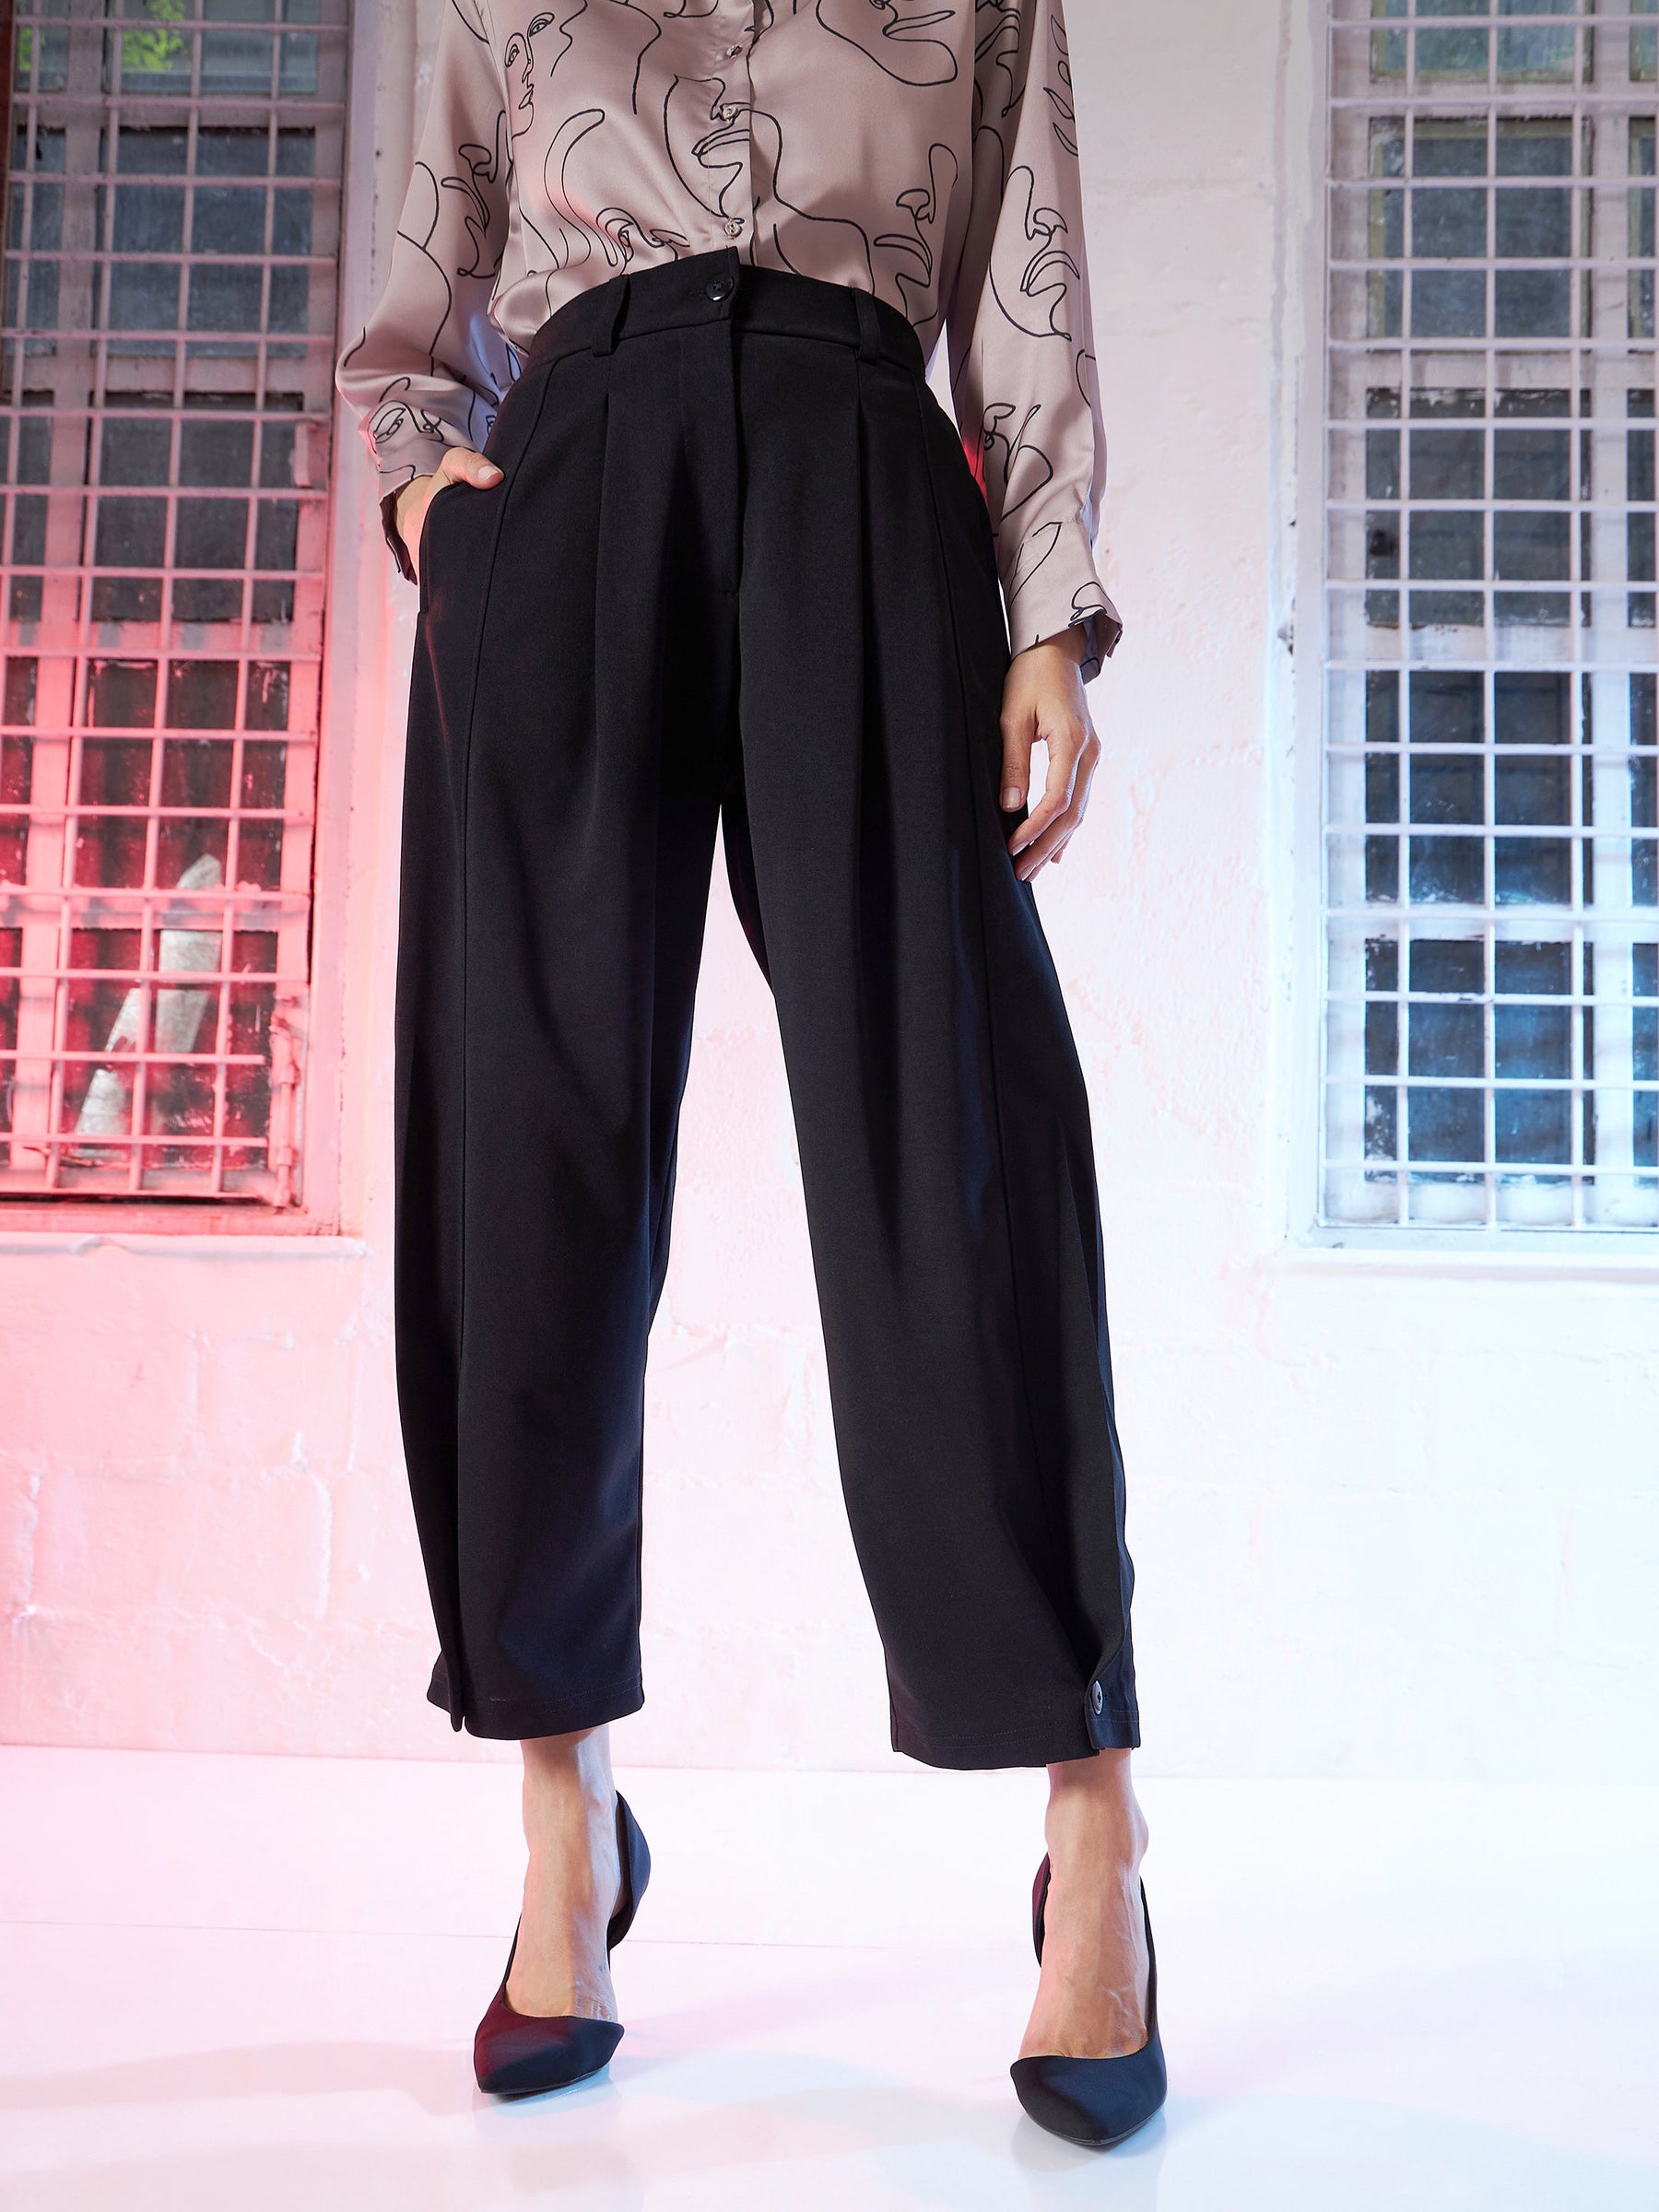 Tibi Eco Silk Pleated Balloon Pants in Black Size 4 Long | Balloon pants,  Clothes design, Pleated